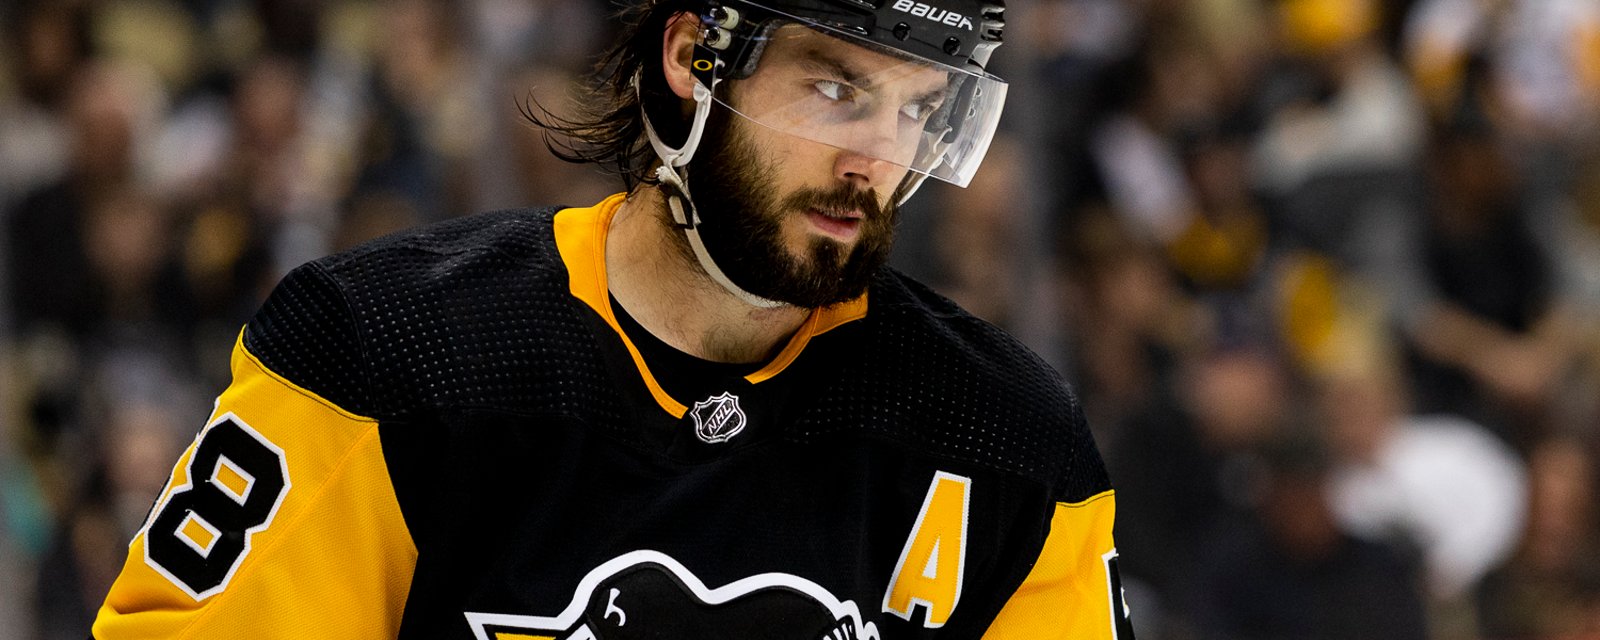 Huge blow to the Penguins as Letang is out long-term! 